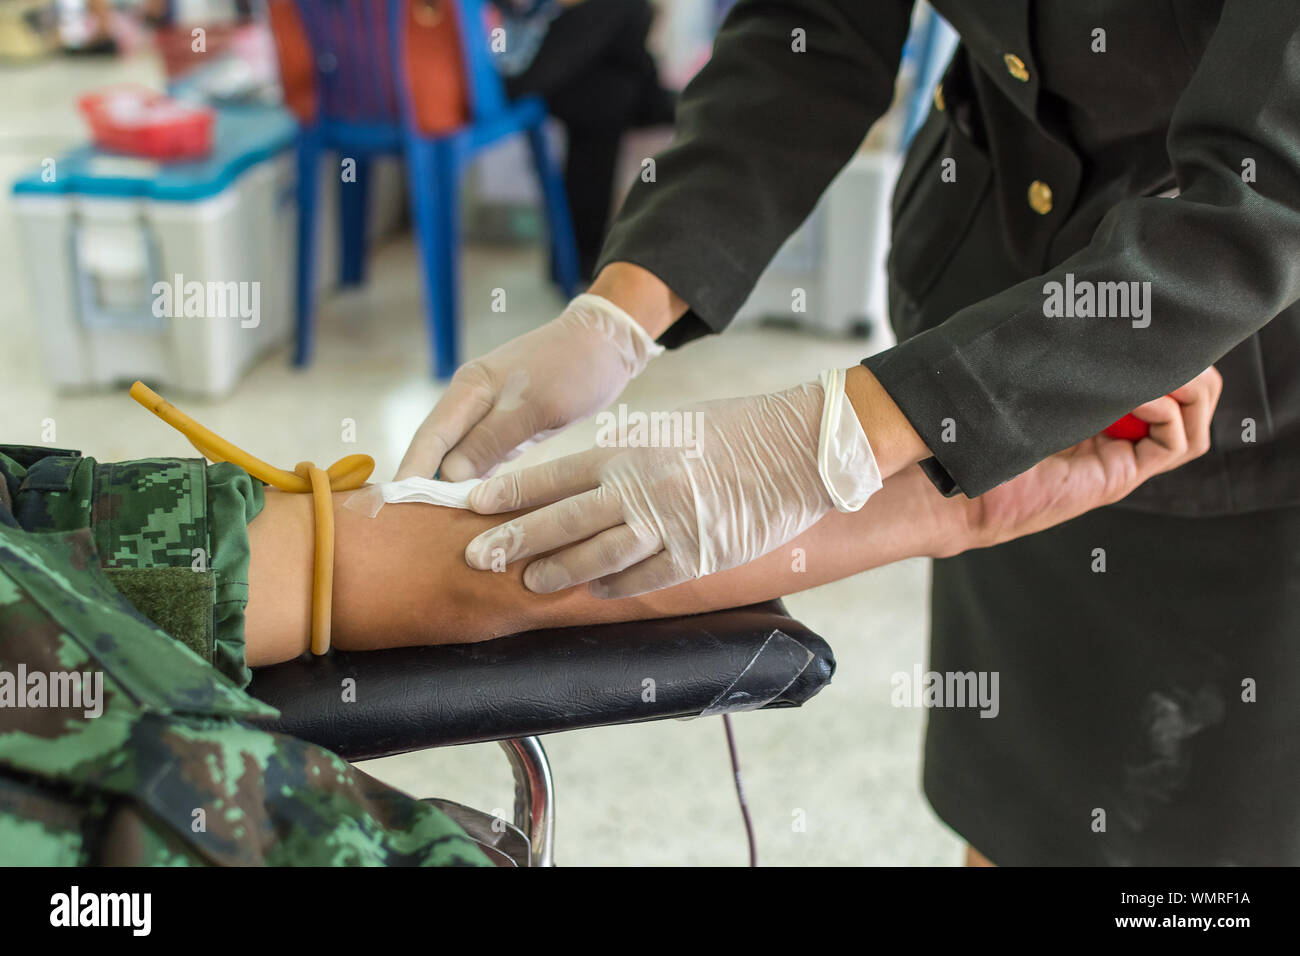 Cropped Image Of Man Donating Blood Stock Photo